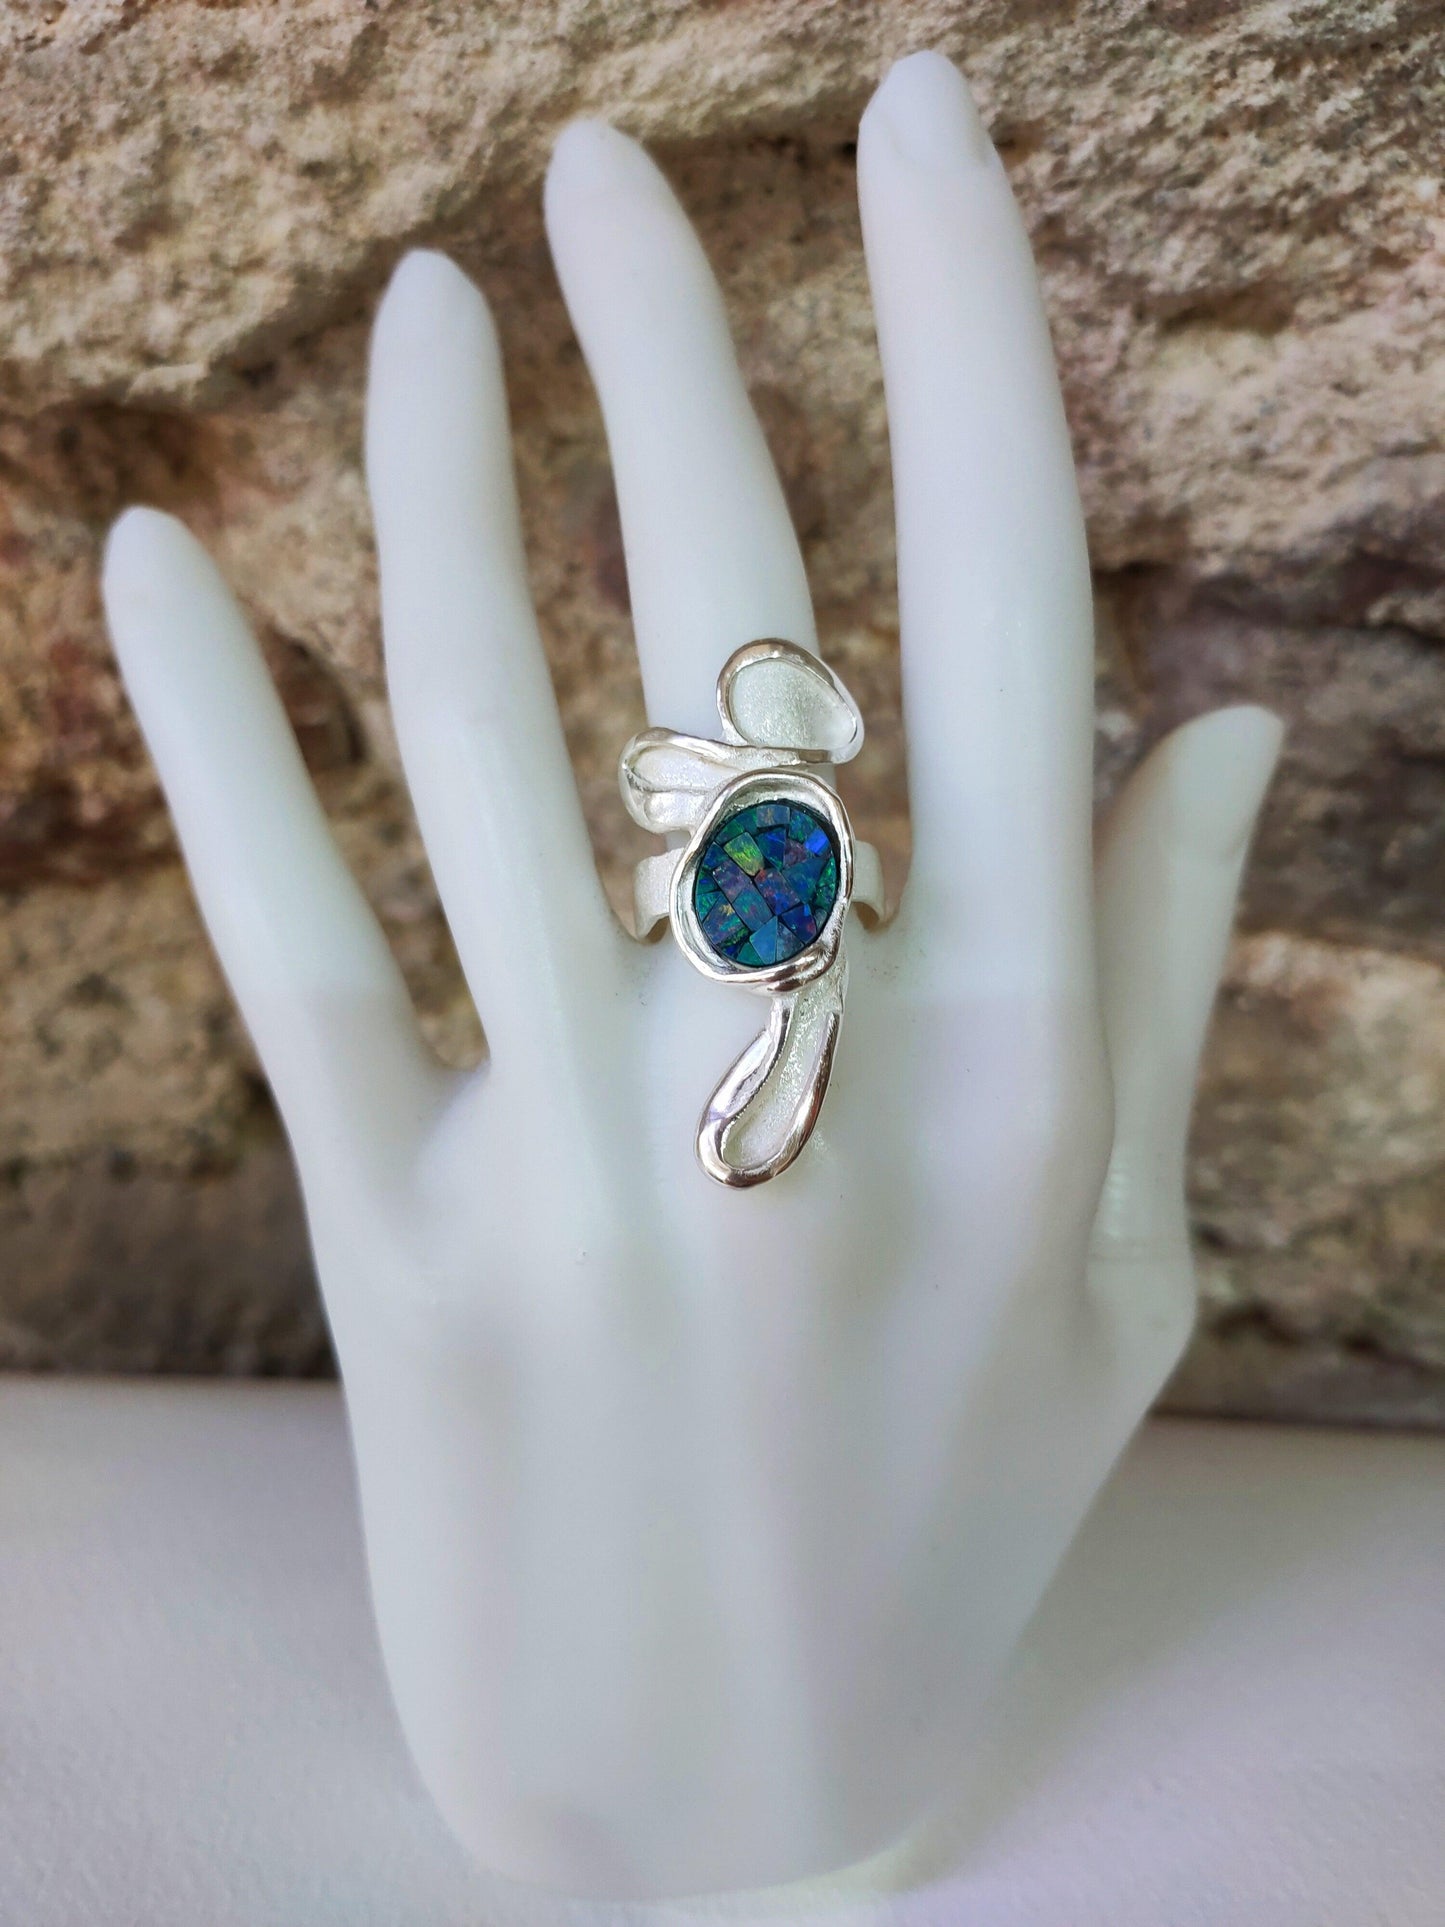 Silver ring with mosaic opal